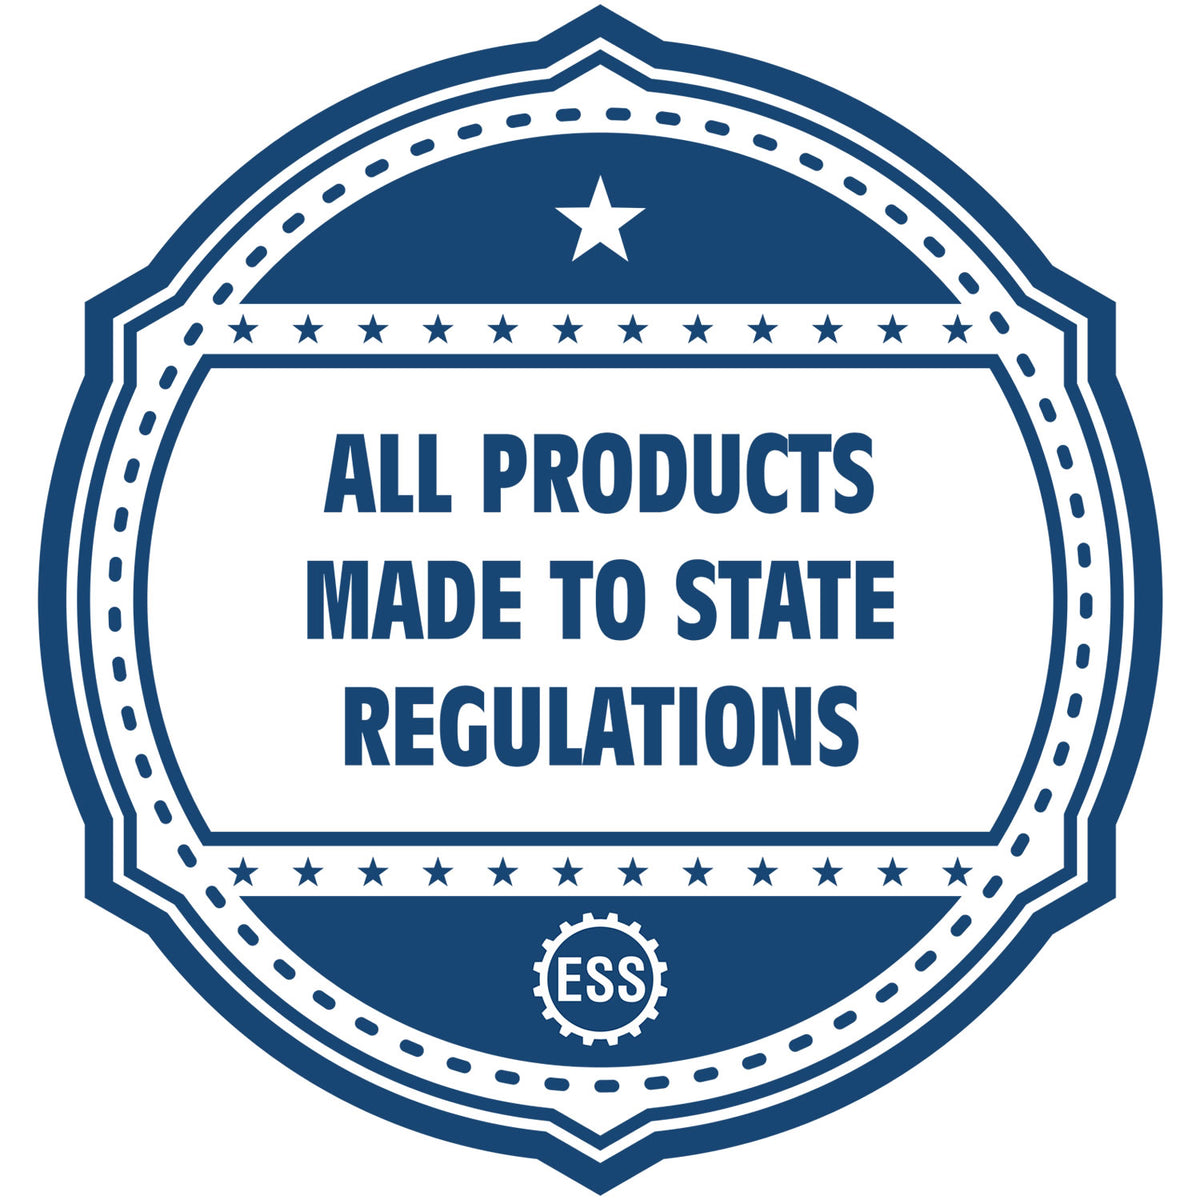 An icon or badge element for the State of Idaho Soft Land Surveyor Embossing Seal showing that this product is made in compliance with state regulations.